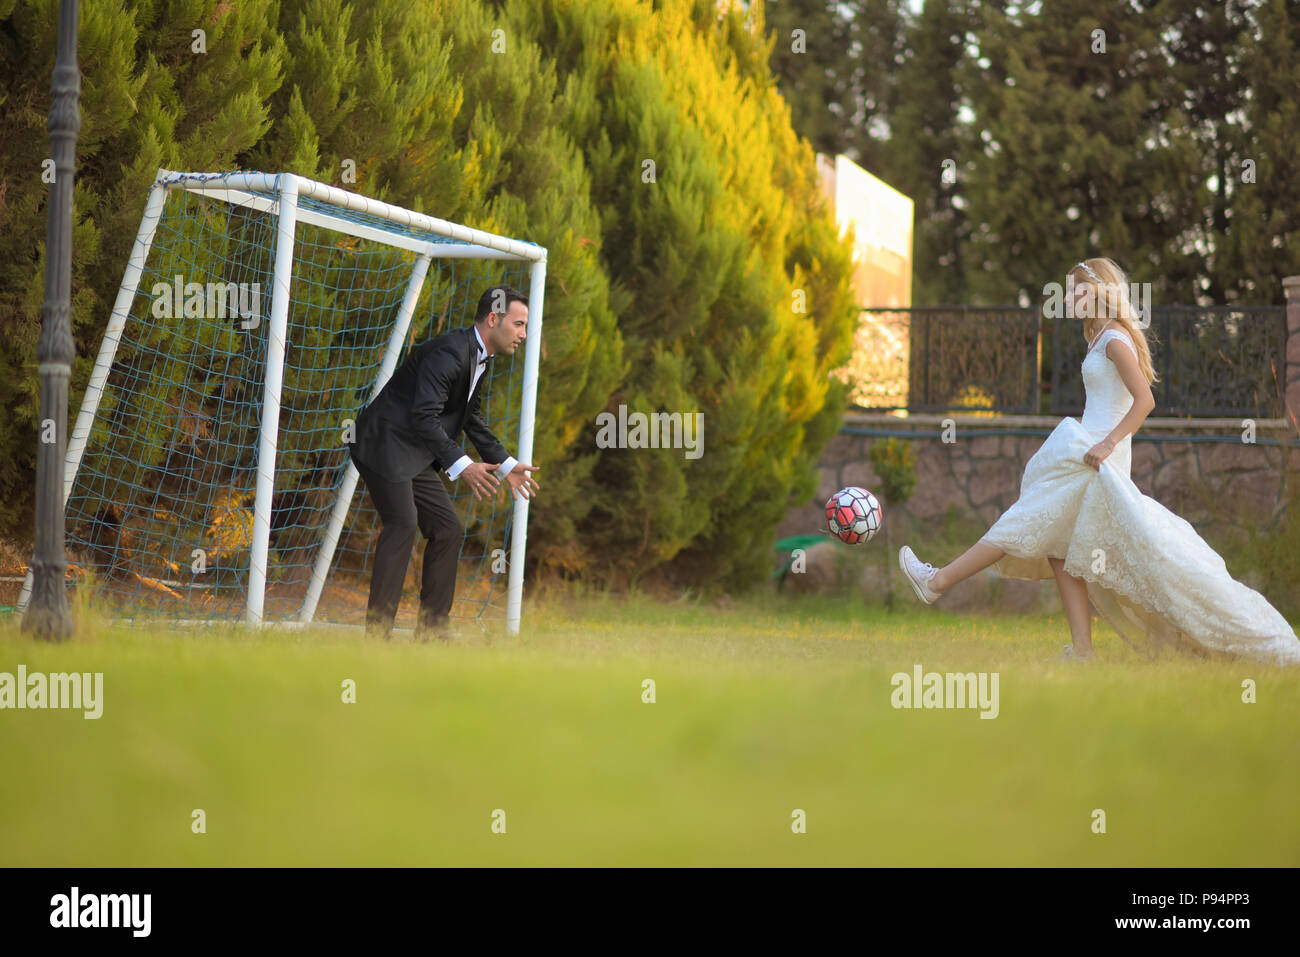 Wedding bride and groom playing football  soccer game bridegroom love marriage marrying couple Stock Photo